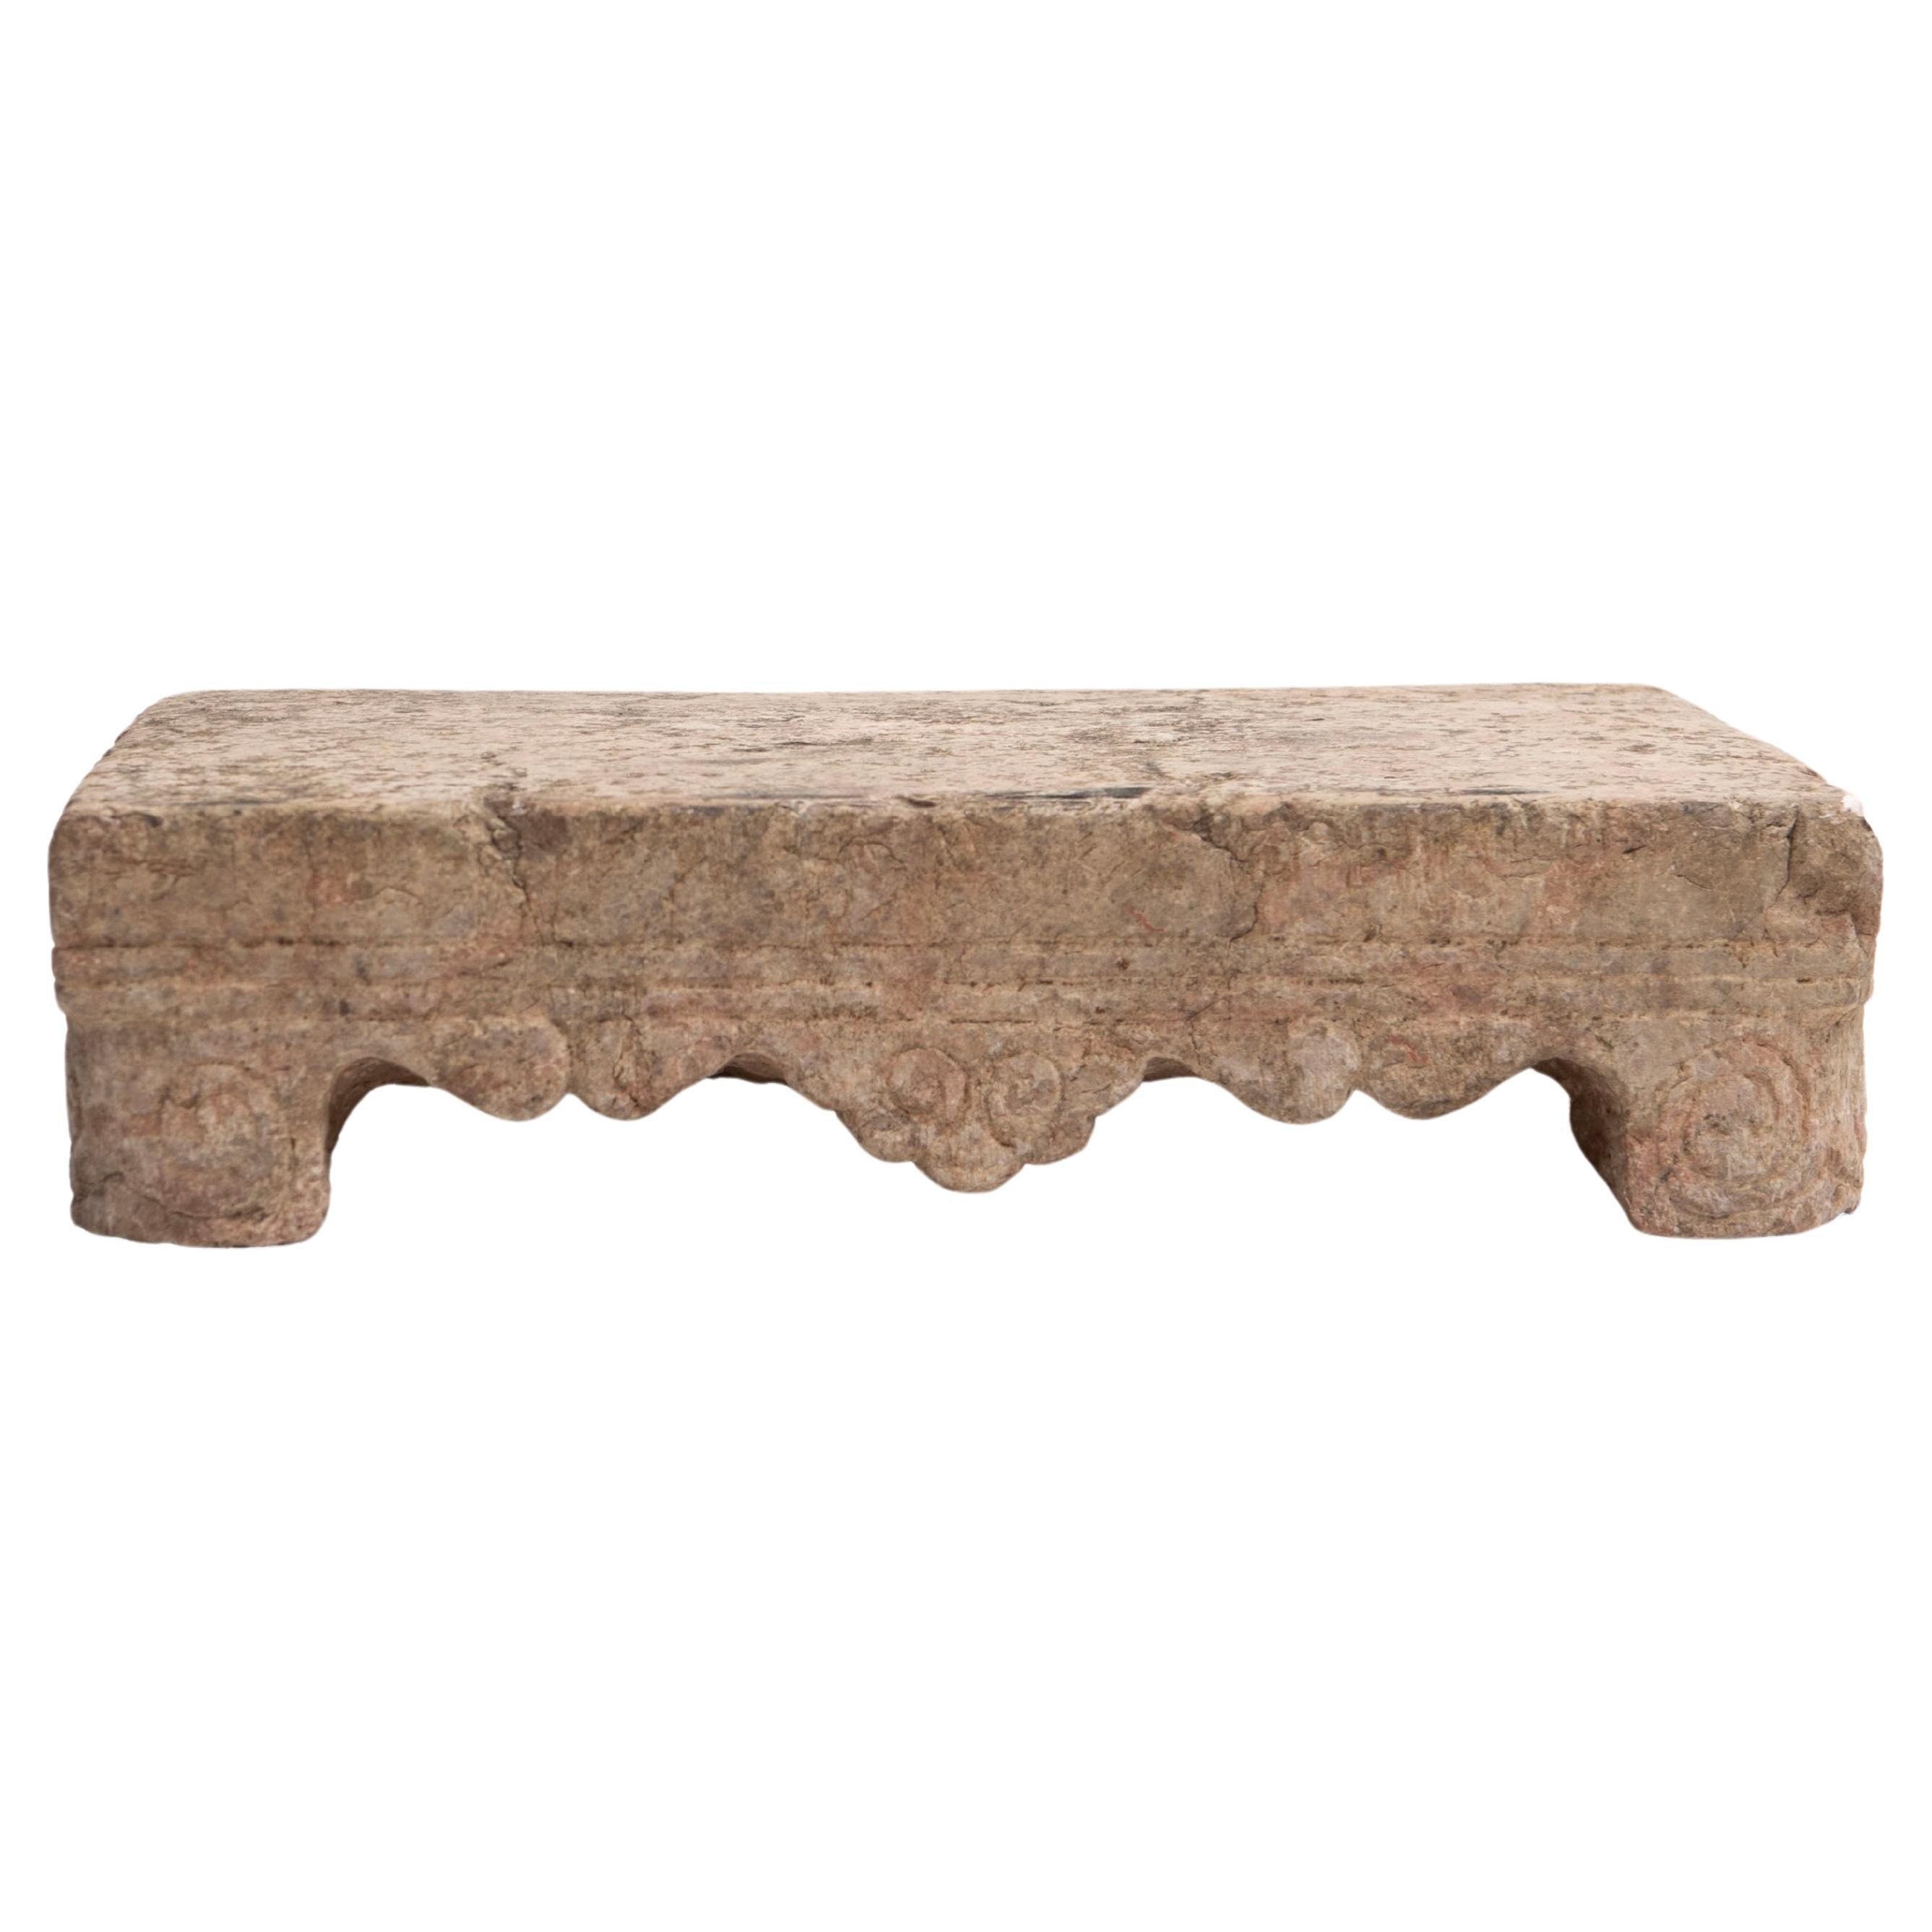 Antique Chinese Ming Stone Table, c. 1500-1600 For Sale